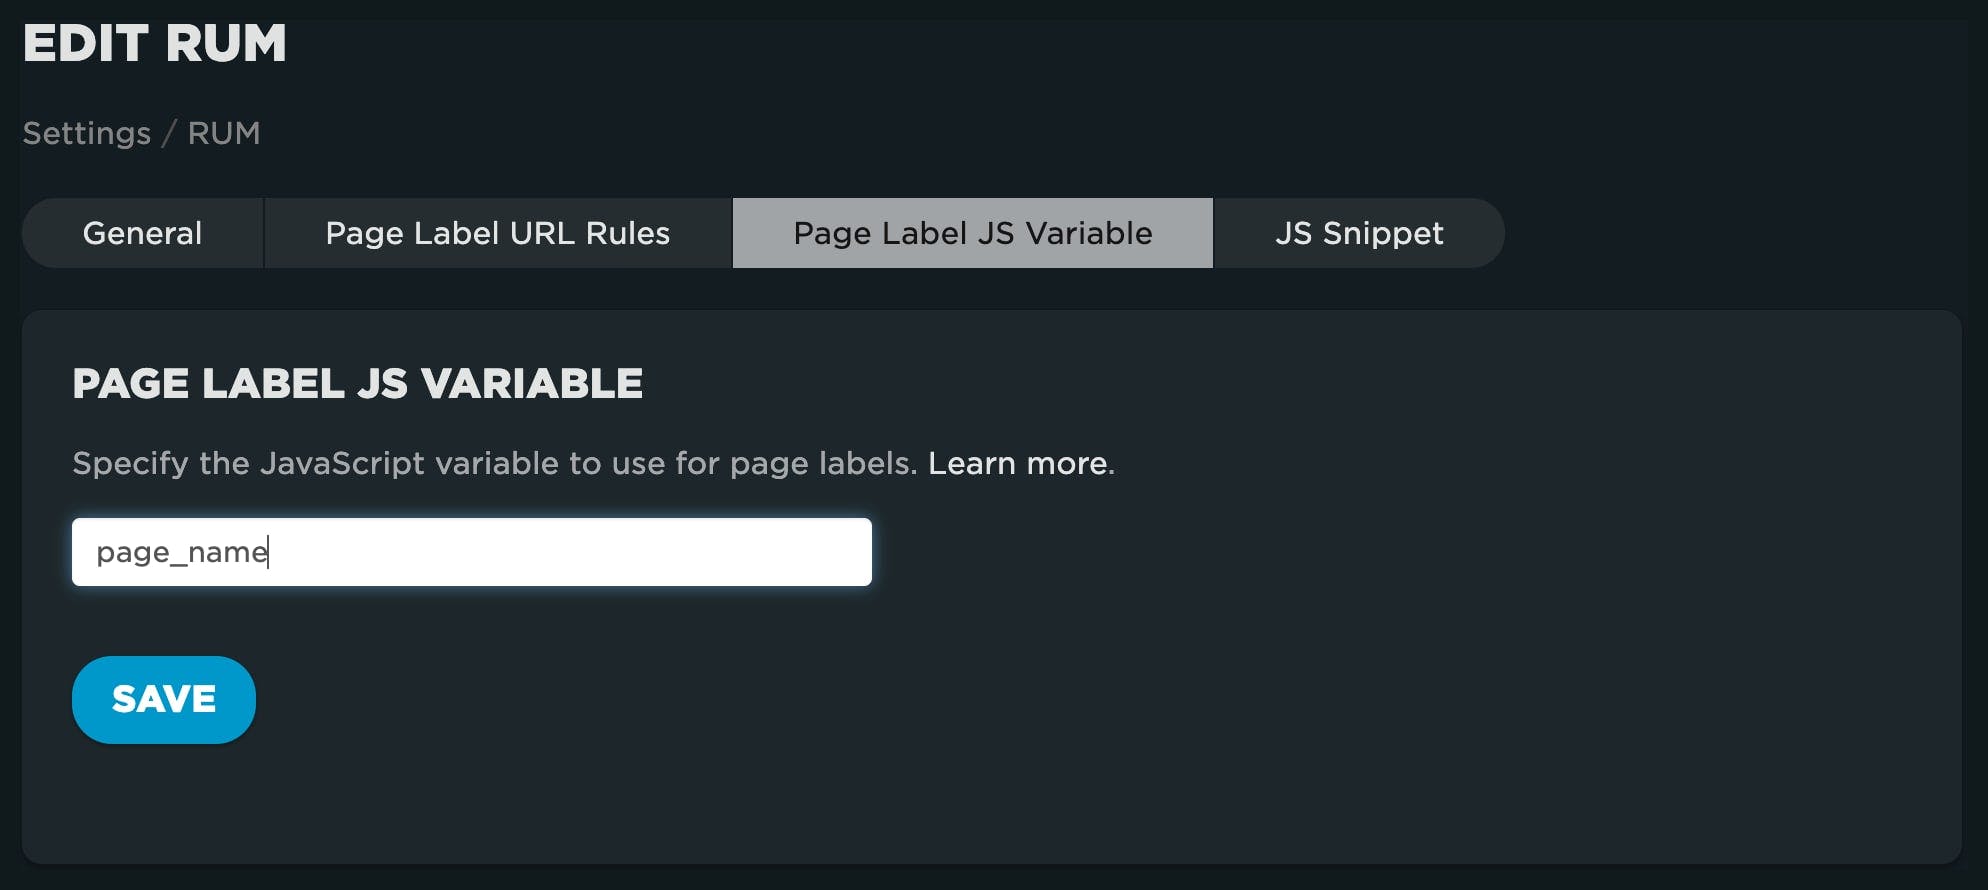 Page label JS Variable UI with a form field populated with a variable called page_name